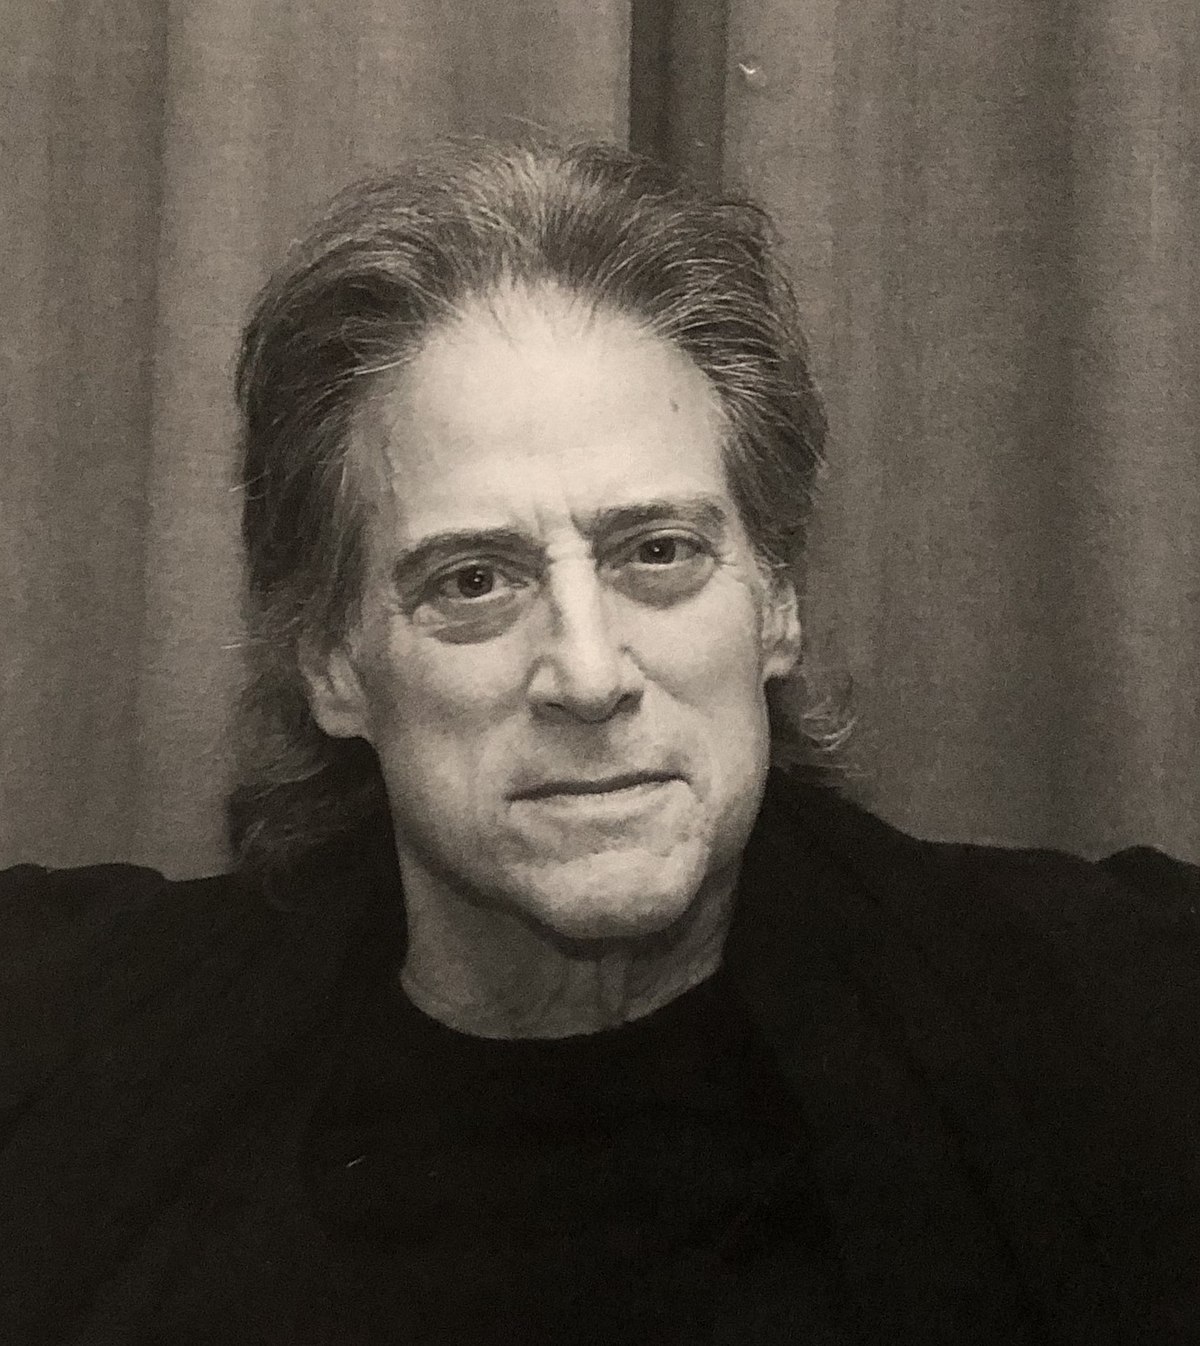 Entertainment News Roundup: Richard Lewis, comic and 'Curb Your Enthusiasm' regular, dies at 76 ; A Minute With: the 'Dune: Part Two' cast on costumes, politics and veils and more